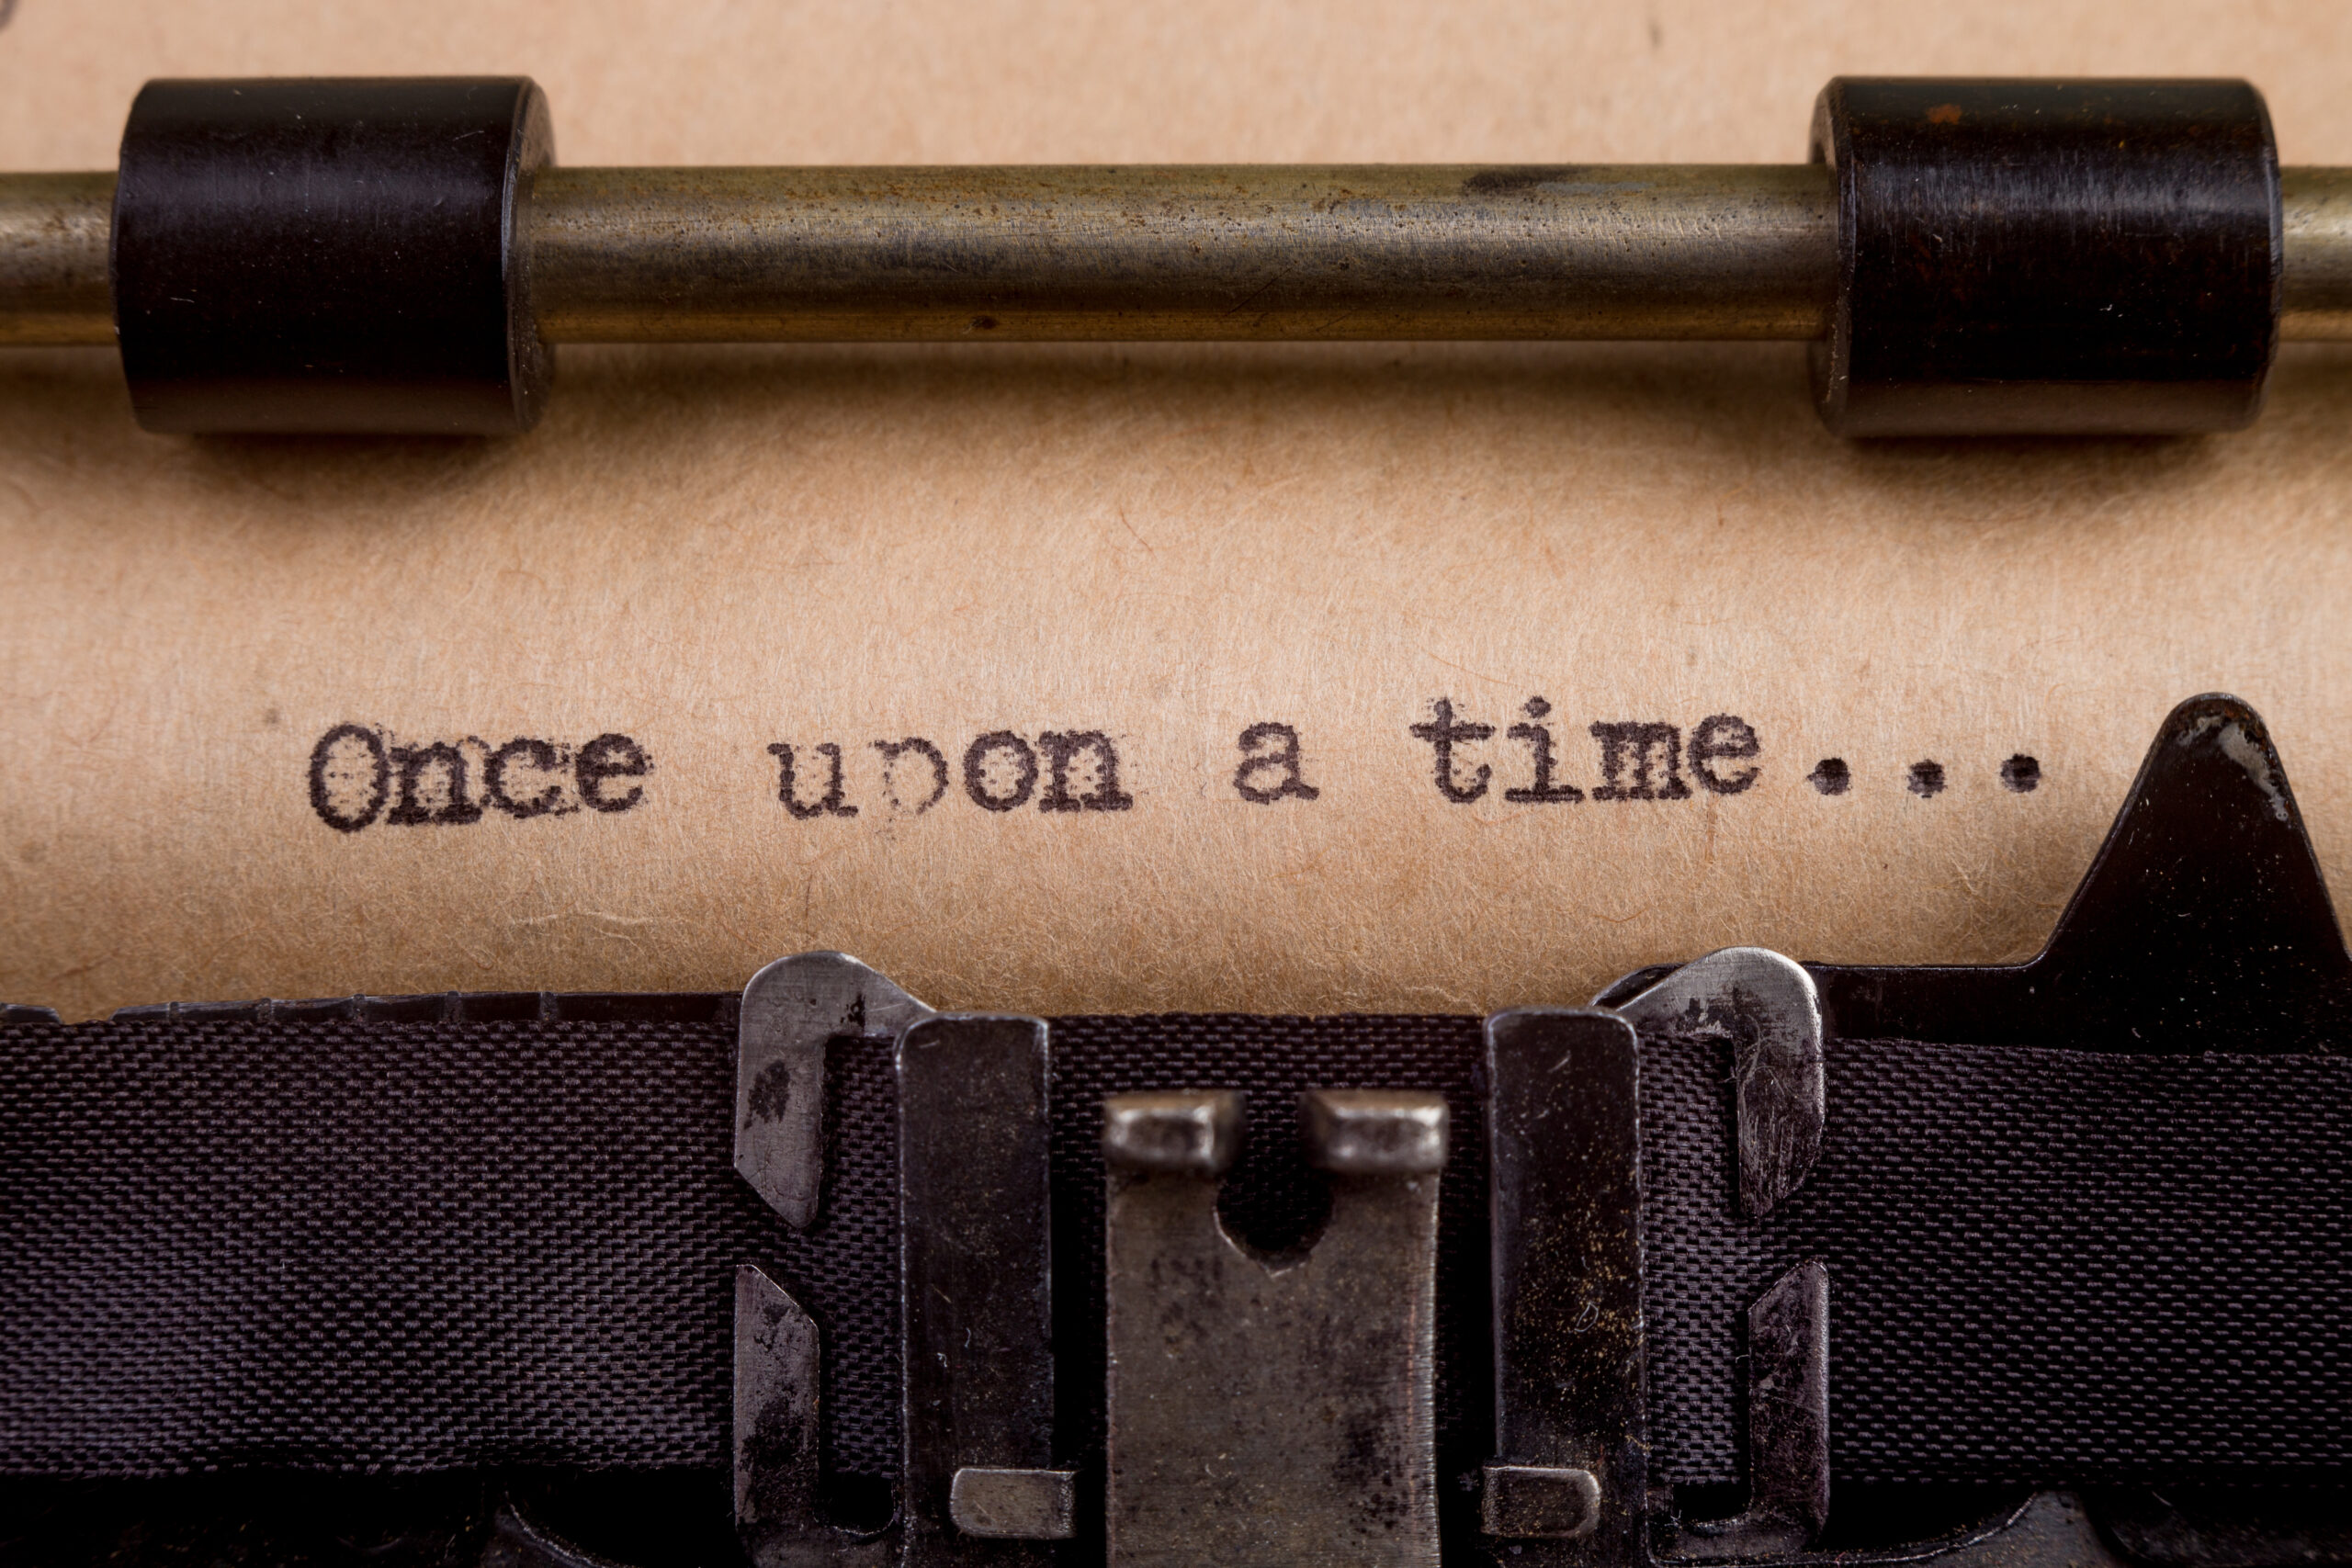 Typed words on a Vintage Typewriter: "Once upon a time ..."